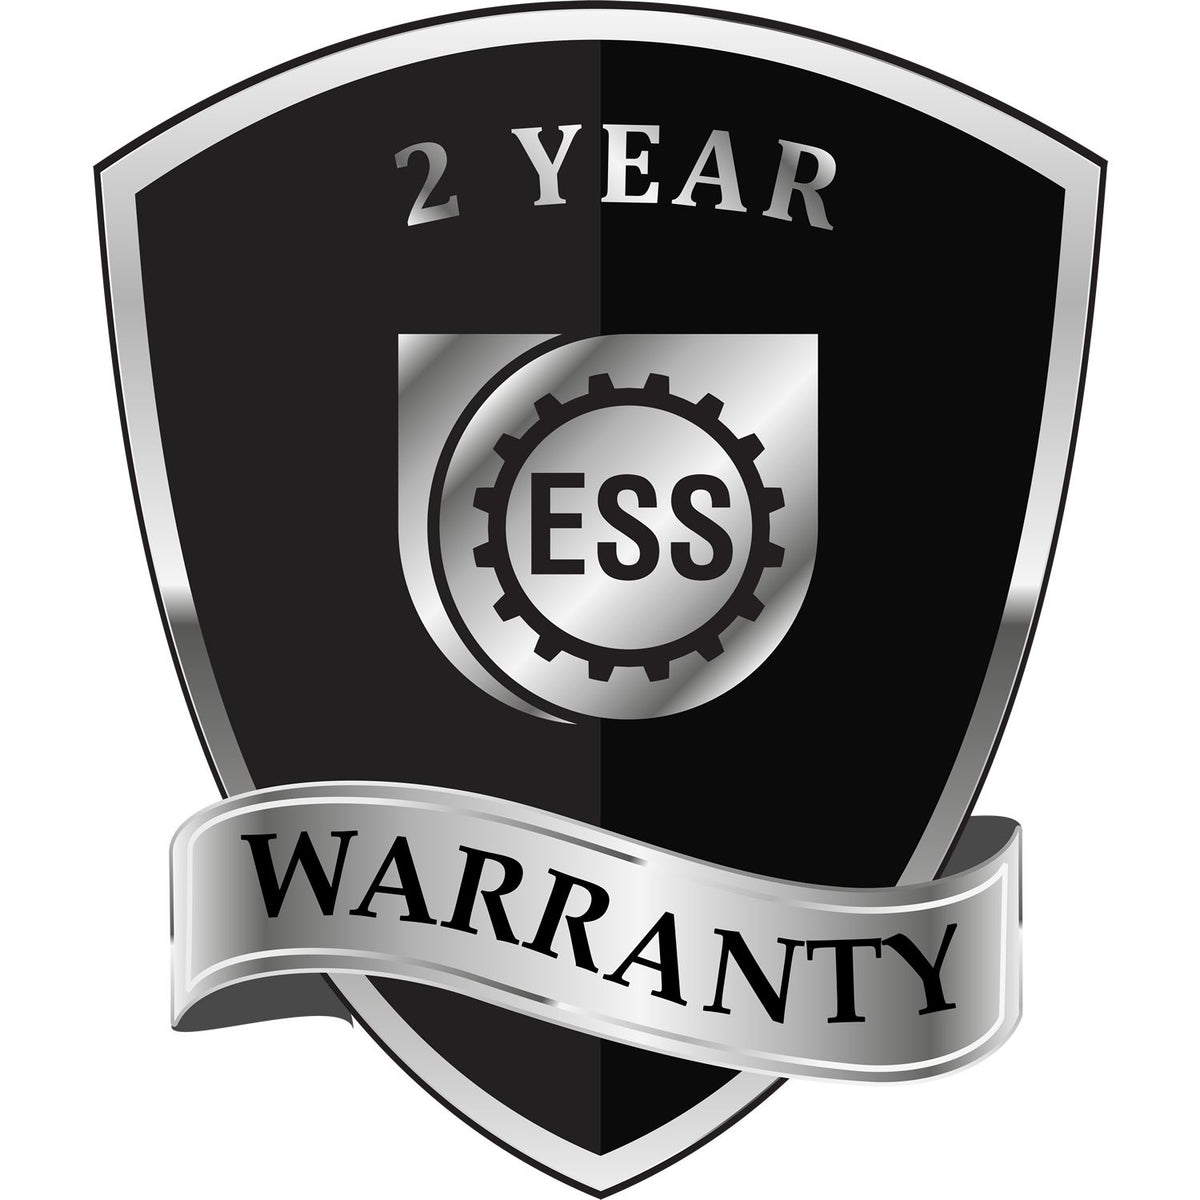 A badge or emblem showing a warranty icon for the Long Reach Maryland Land Surveyor Seal